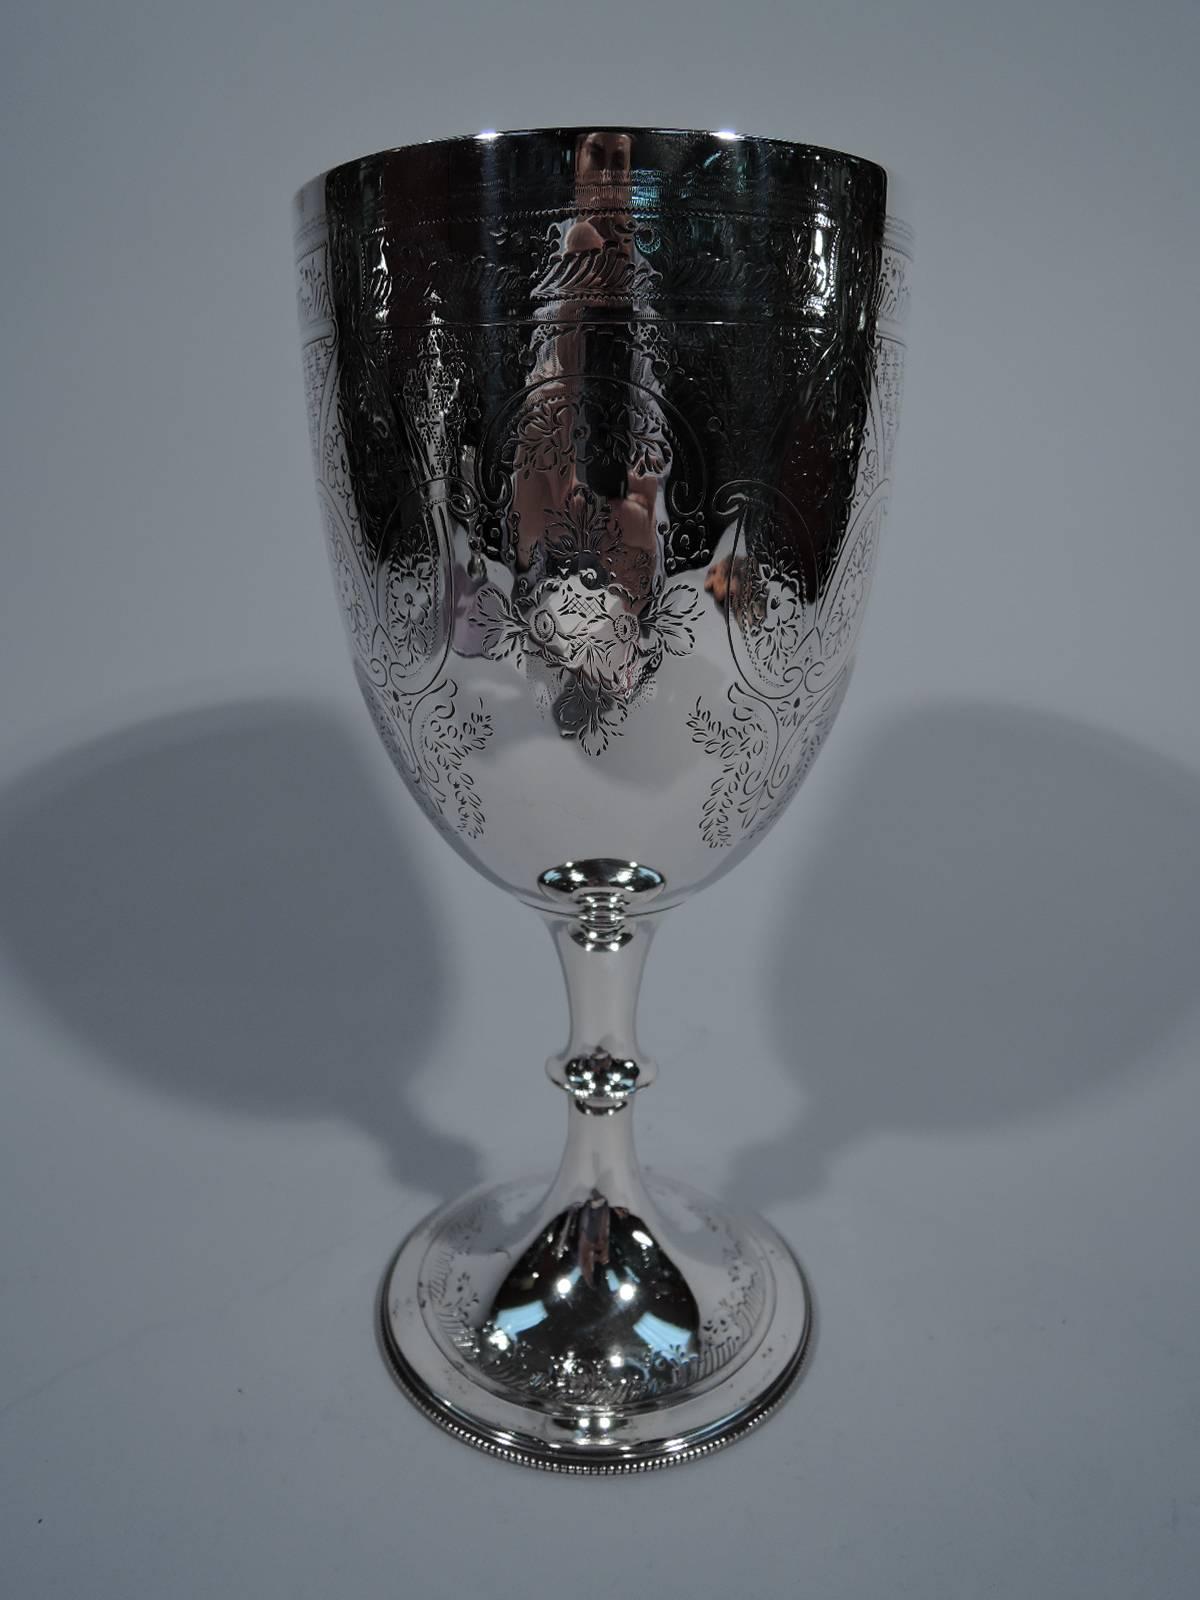 Edwardian sterling silver goblet. Made by Walker & Hall in Sheffield in 1902. Tall bowl with curved base mounted to stem with flange knop on raised foot. Knop has dentil rim. Foot has beaded rim. Engraved scrolled border comprising C-scrolls, and